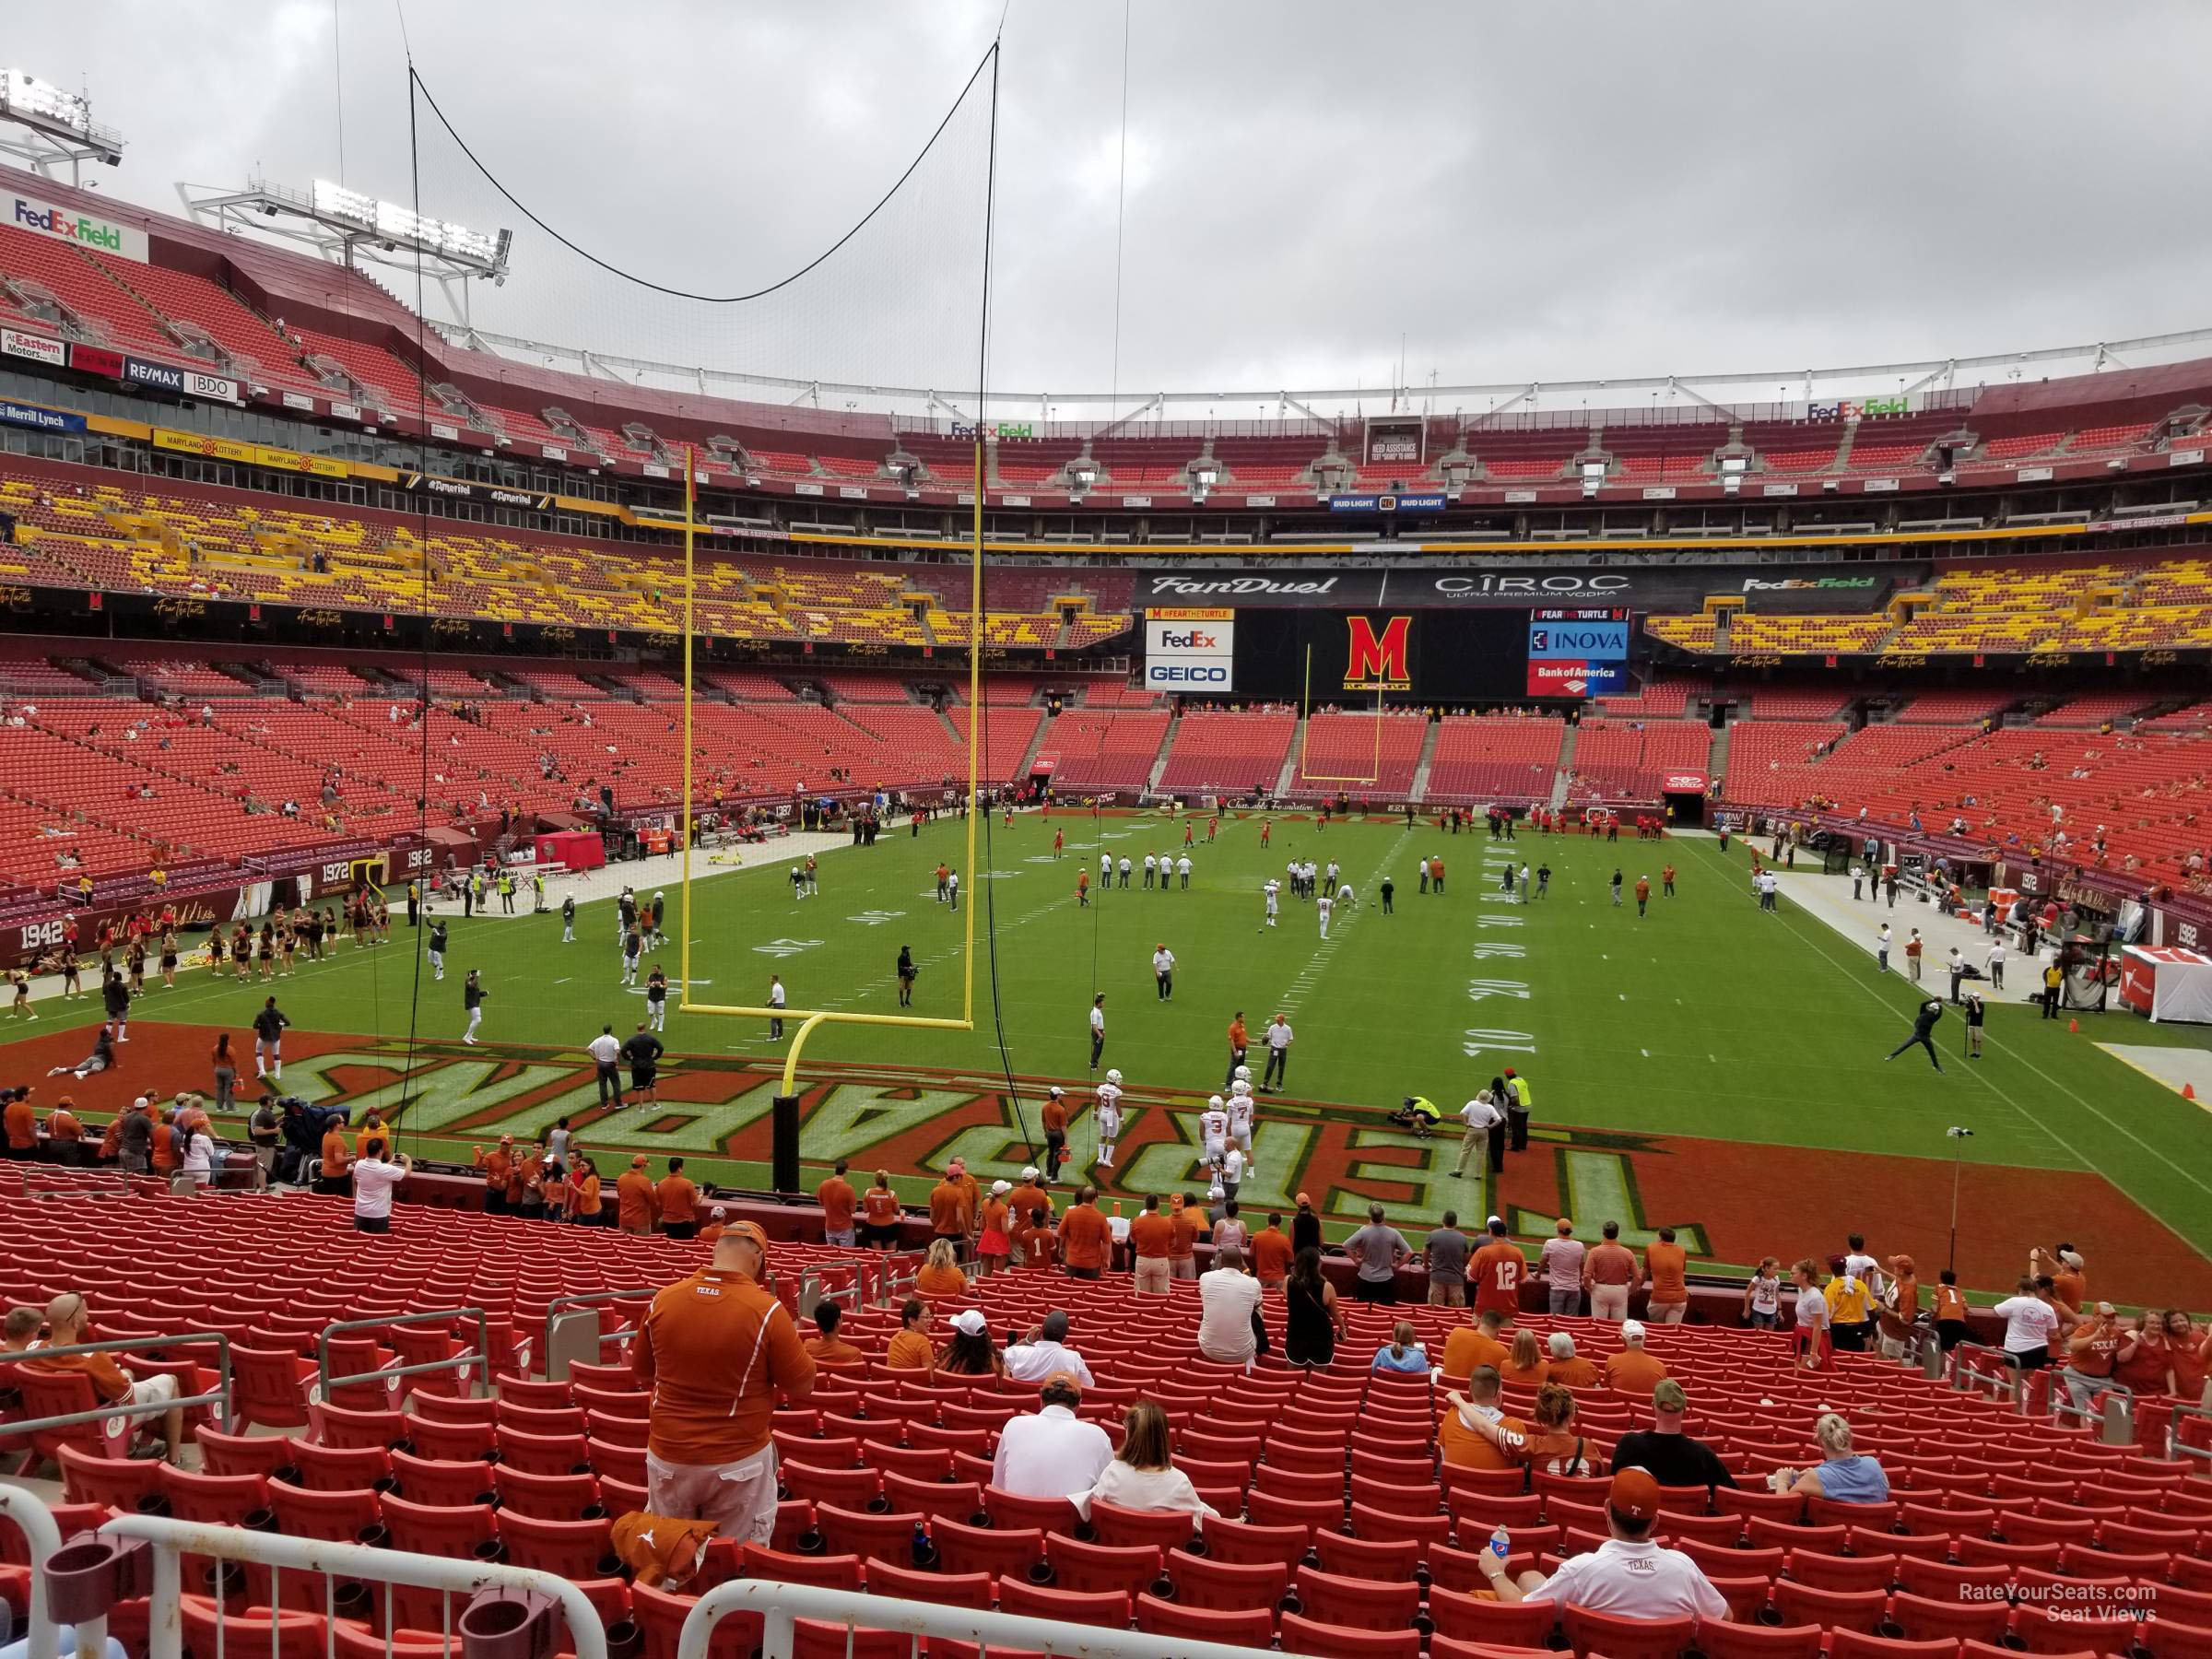 section 231, row 1 seat view  - fedexfield